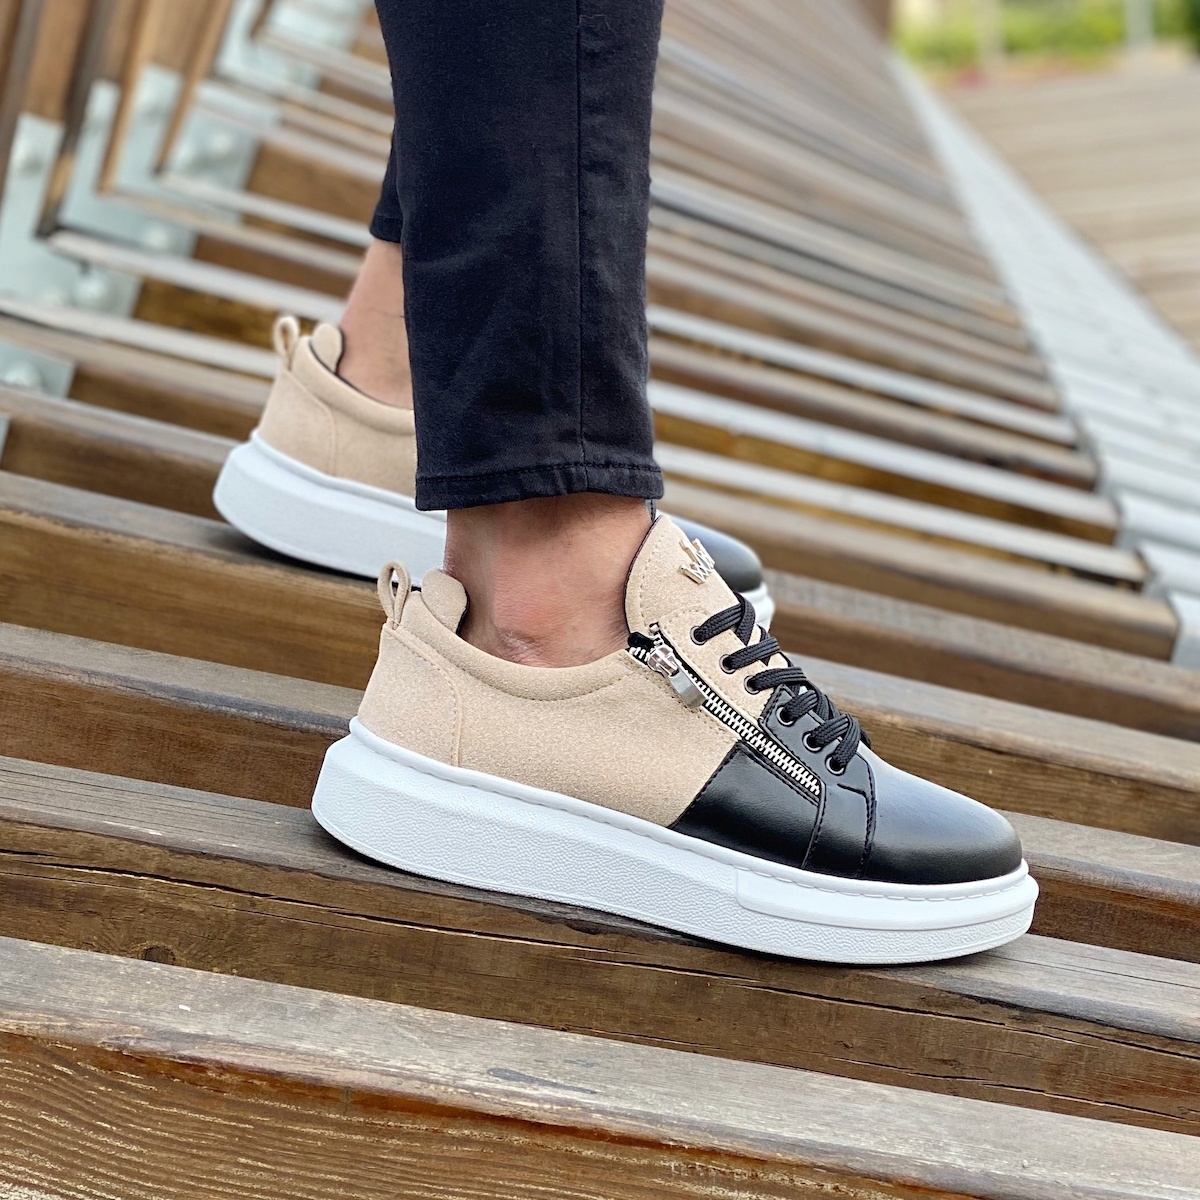 Hype Sole Zipped Style Sneakers in Cream-Black